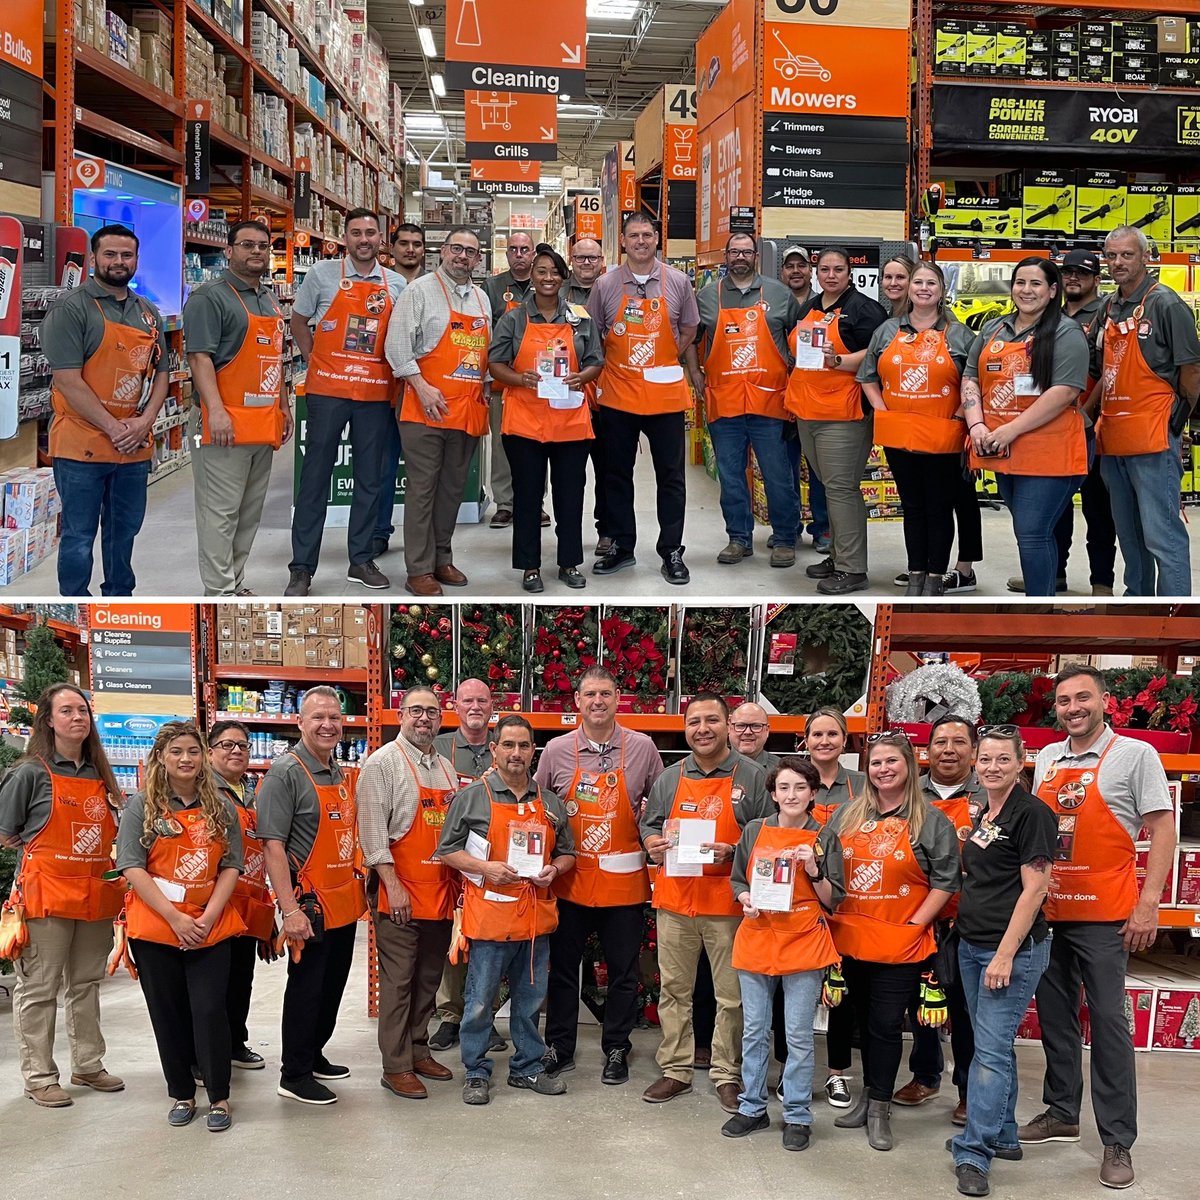 I want to thank our great associates in 503 and 580 for all they are doing! Keep up the great work! #PoweroftheGulf @jreed4401 @THDCogorno @DGM_MarcialRod